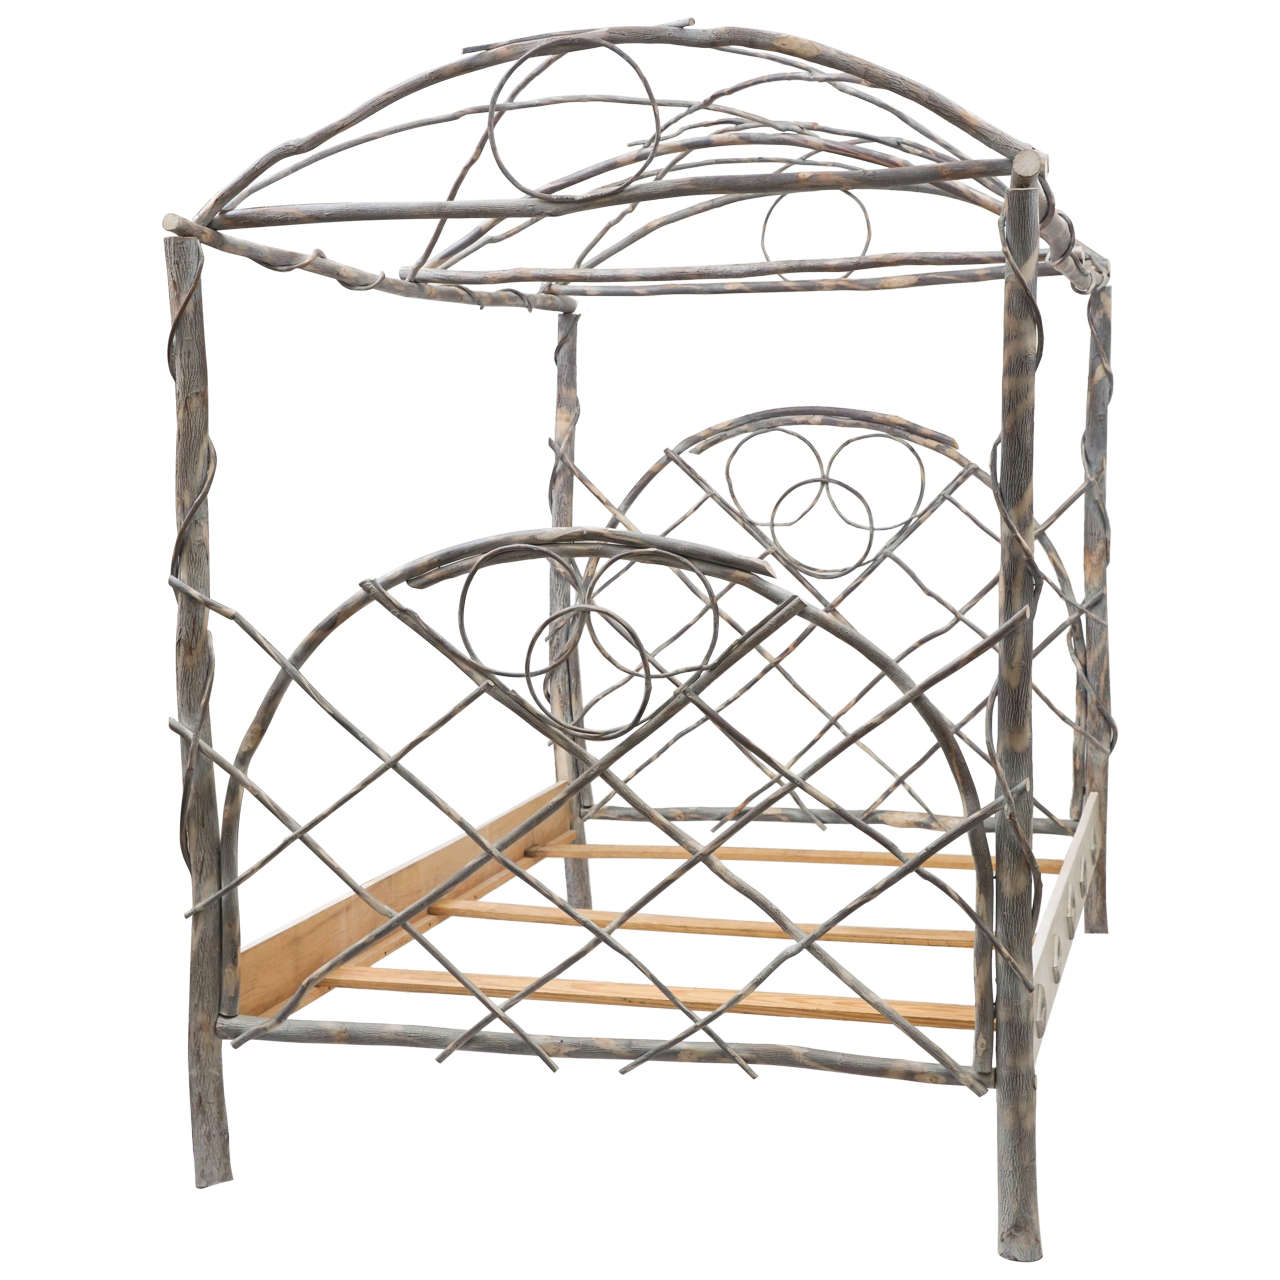 Whimsical Canopy Cottage Twig Bedframe For Sale